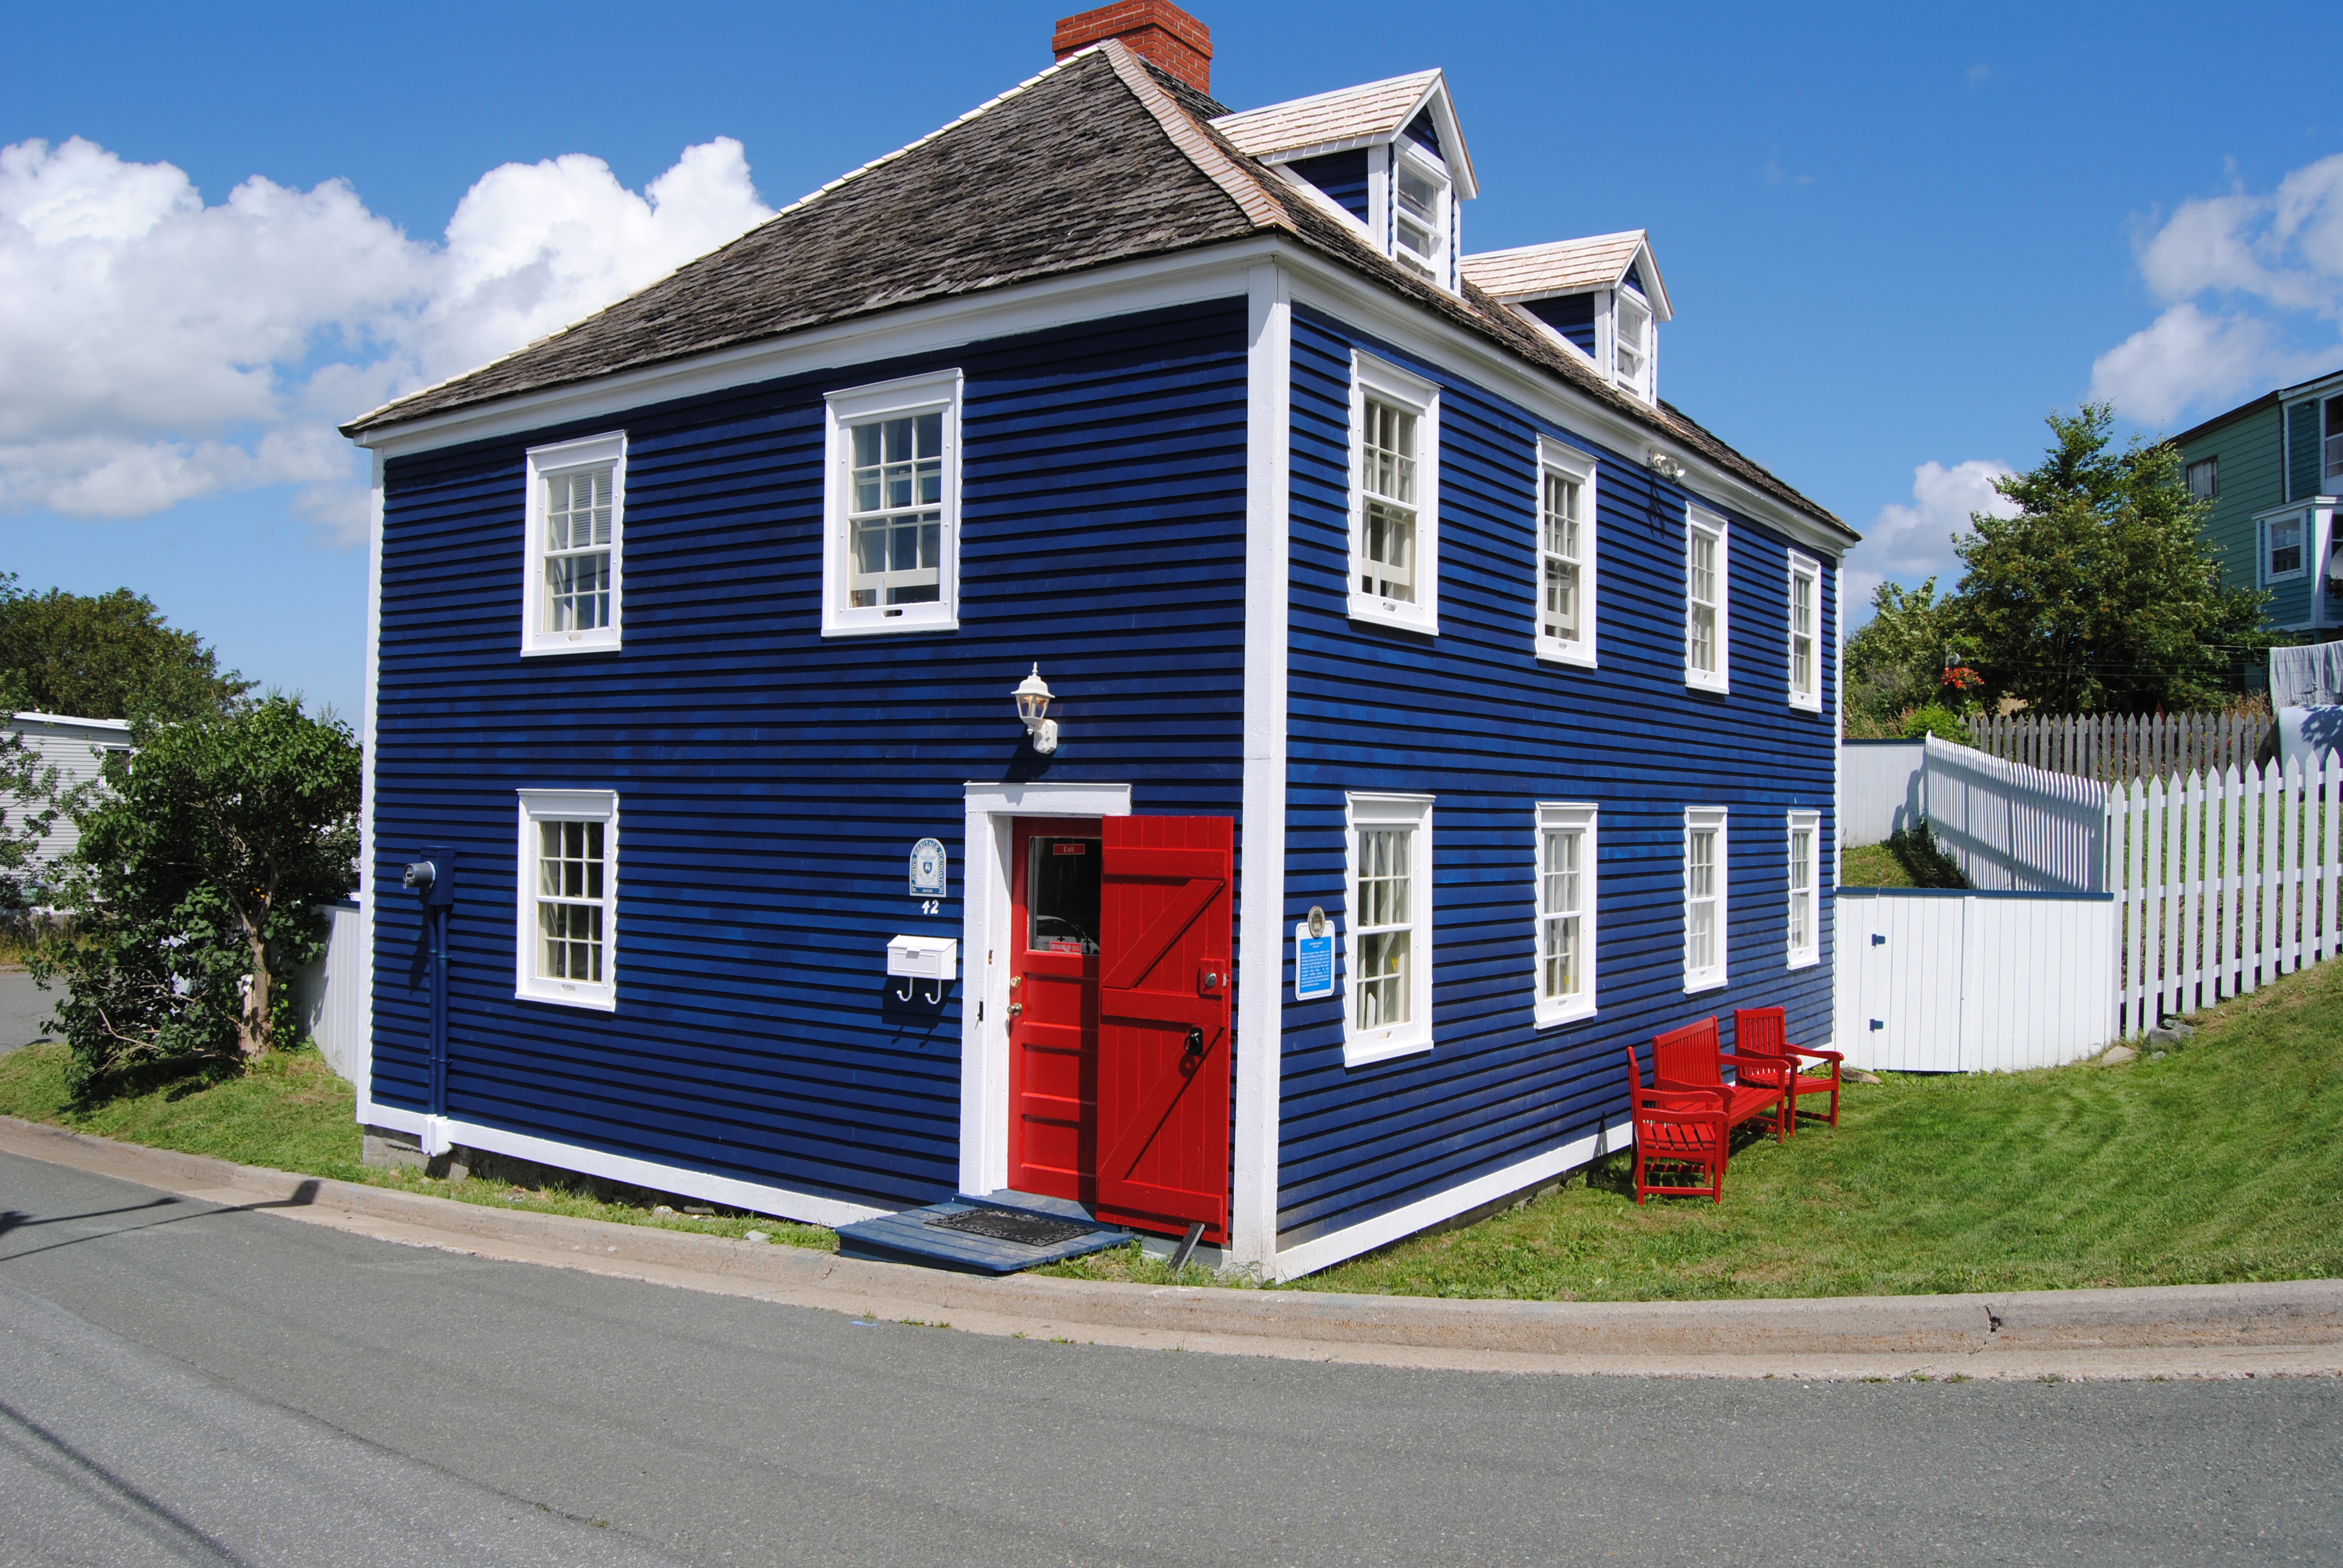 A Heritage home in St. John's. A simple two-storey house with blue clapboard siding. The home is located on Signal Hill.